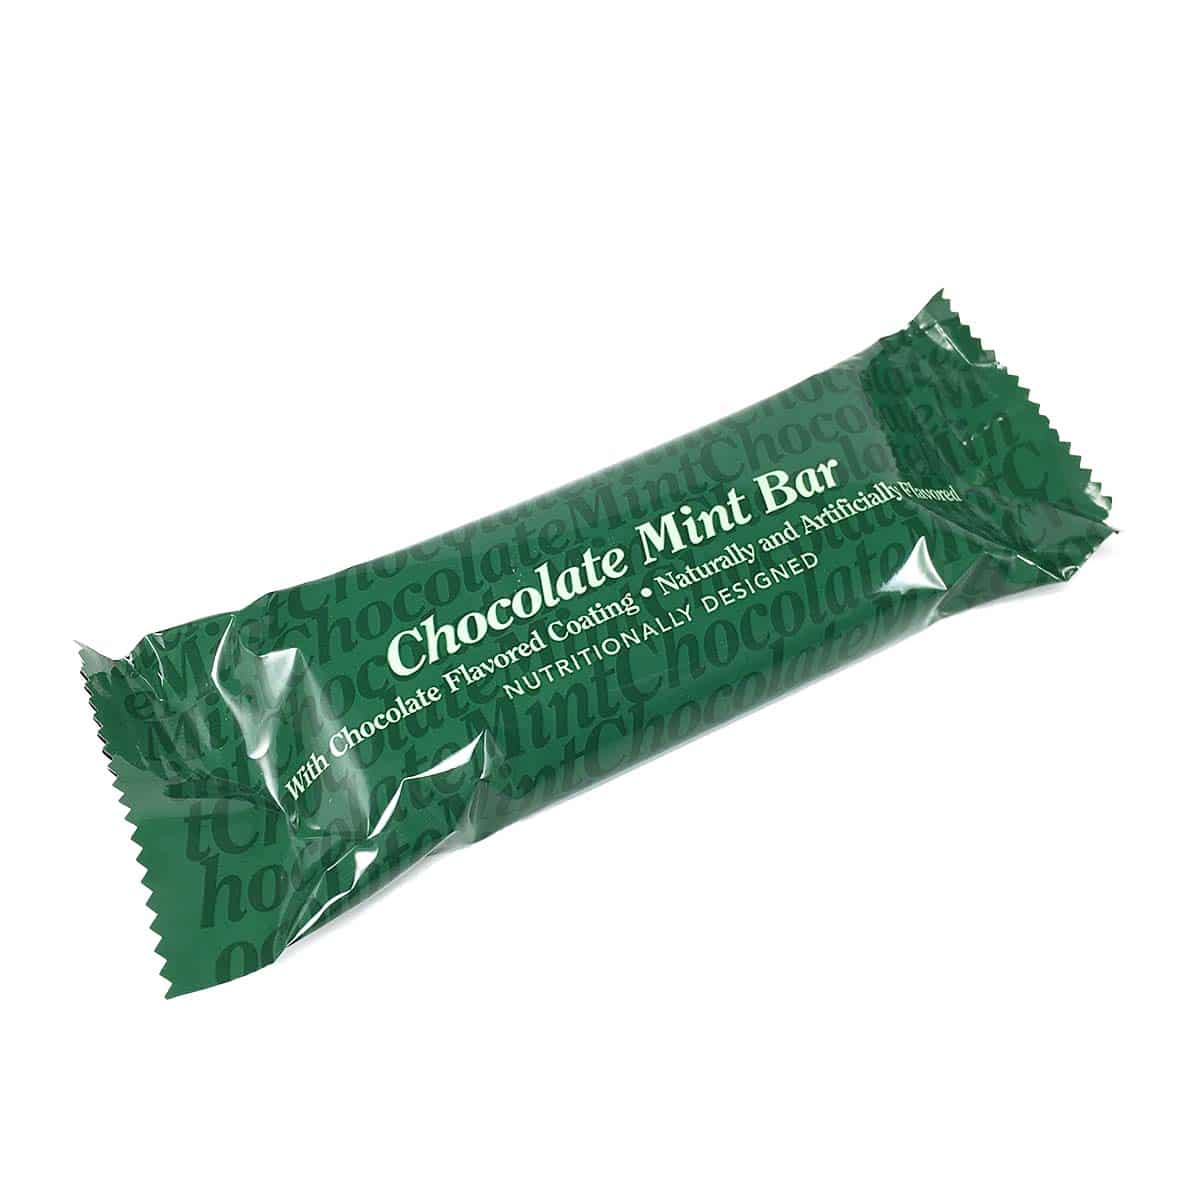 Chocolate Mint Snack Bar (7/Box) - BestMed - Doctors Weight Loss